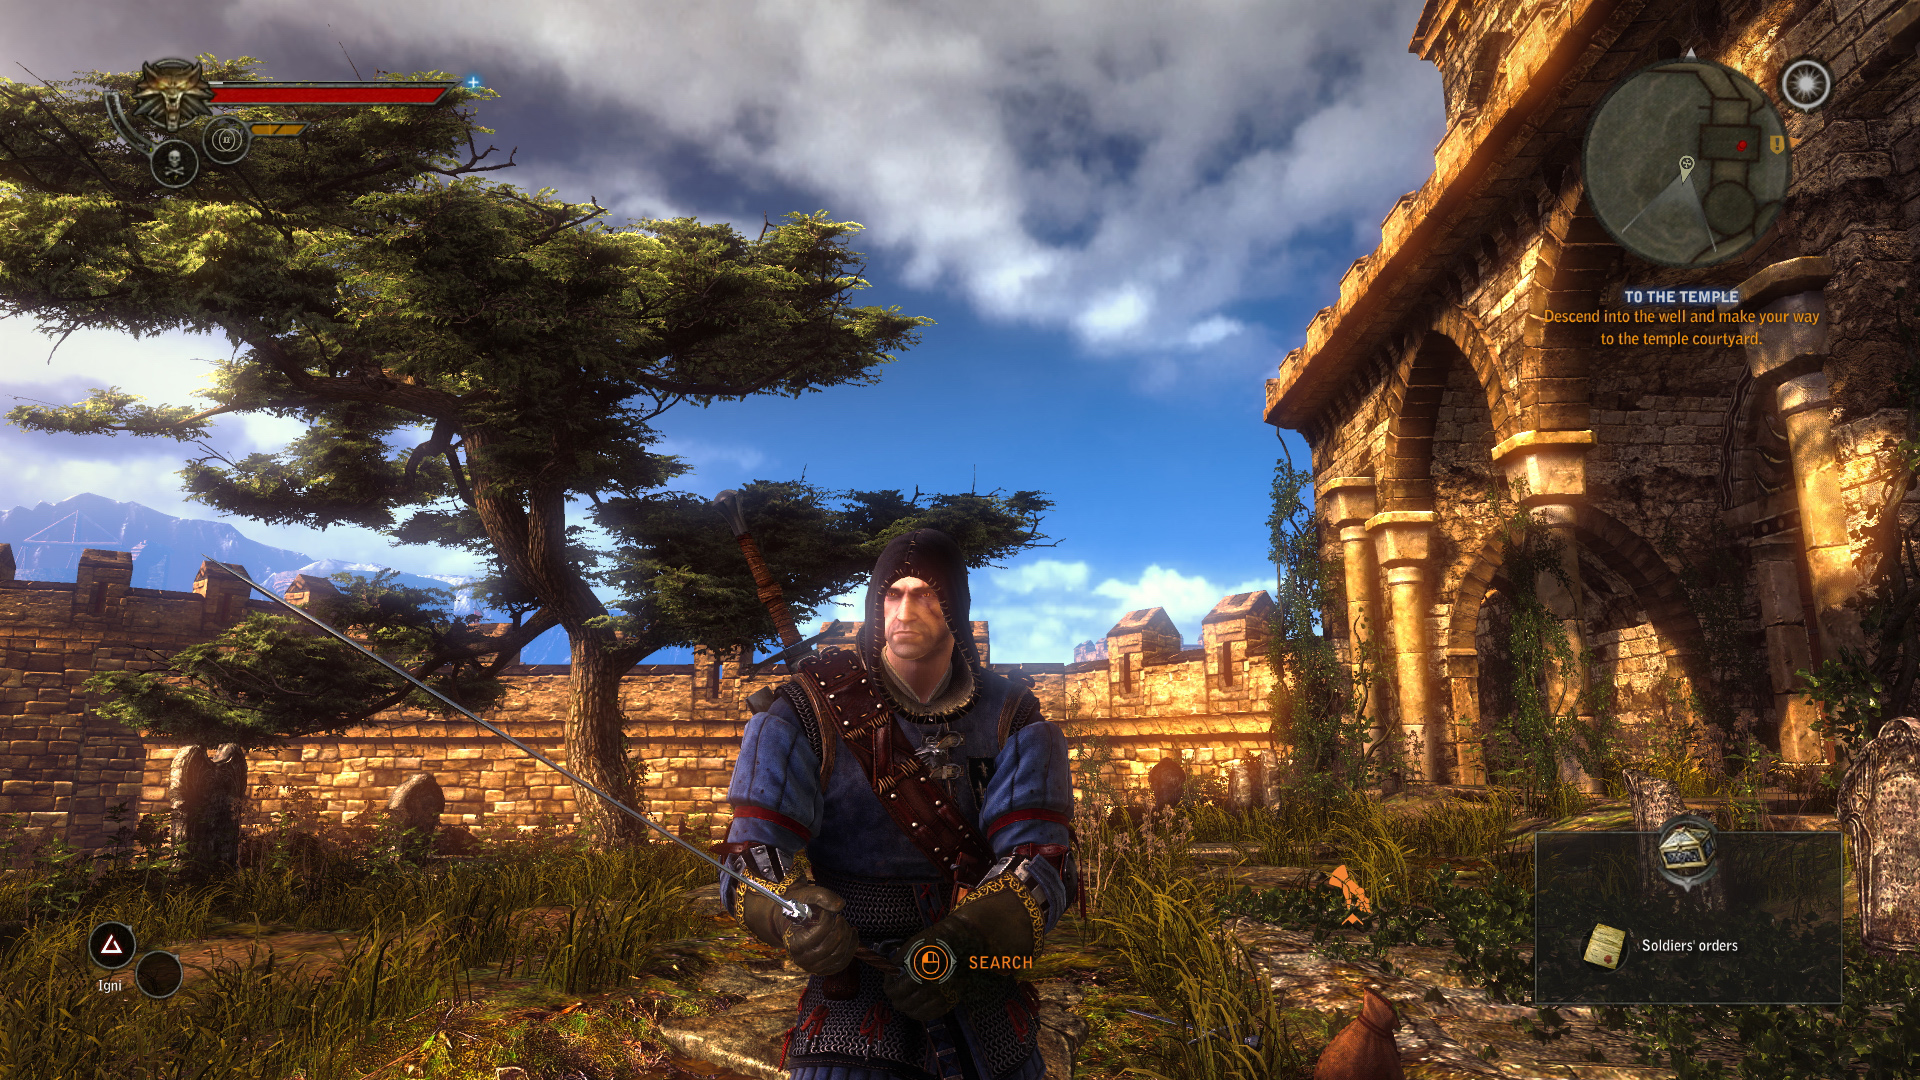 Steam Community :: Guide :: The Witcher 2 Enhancement Project